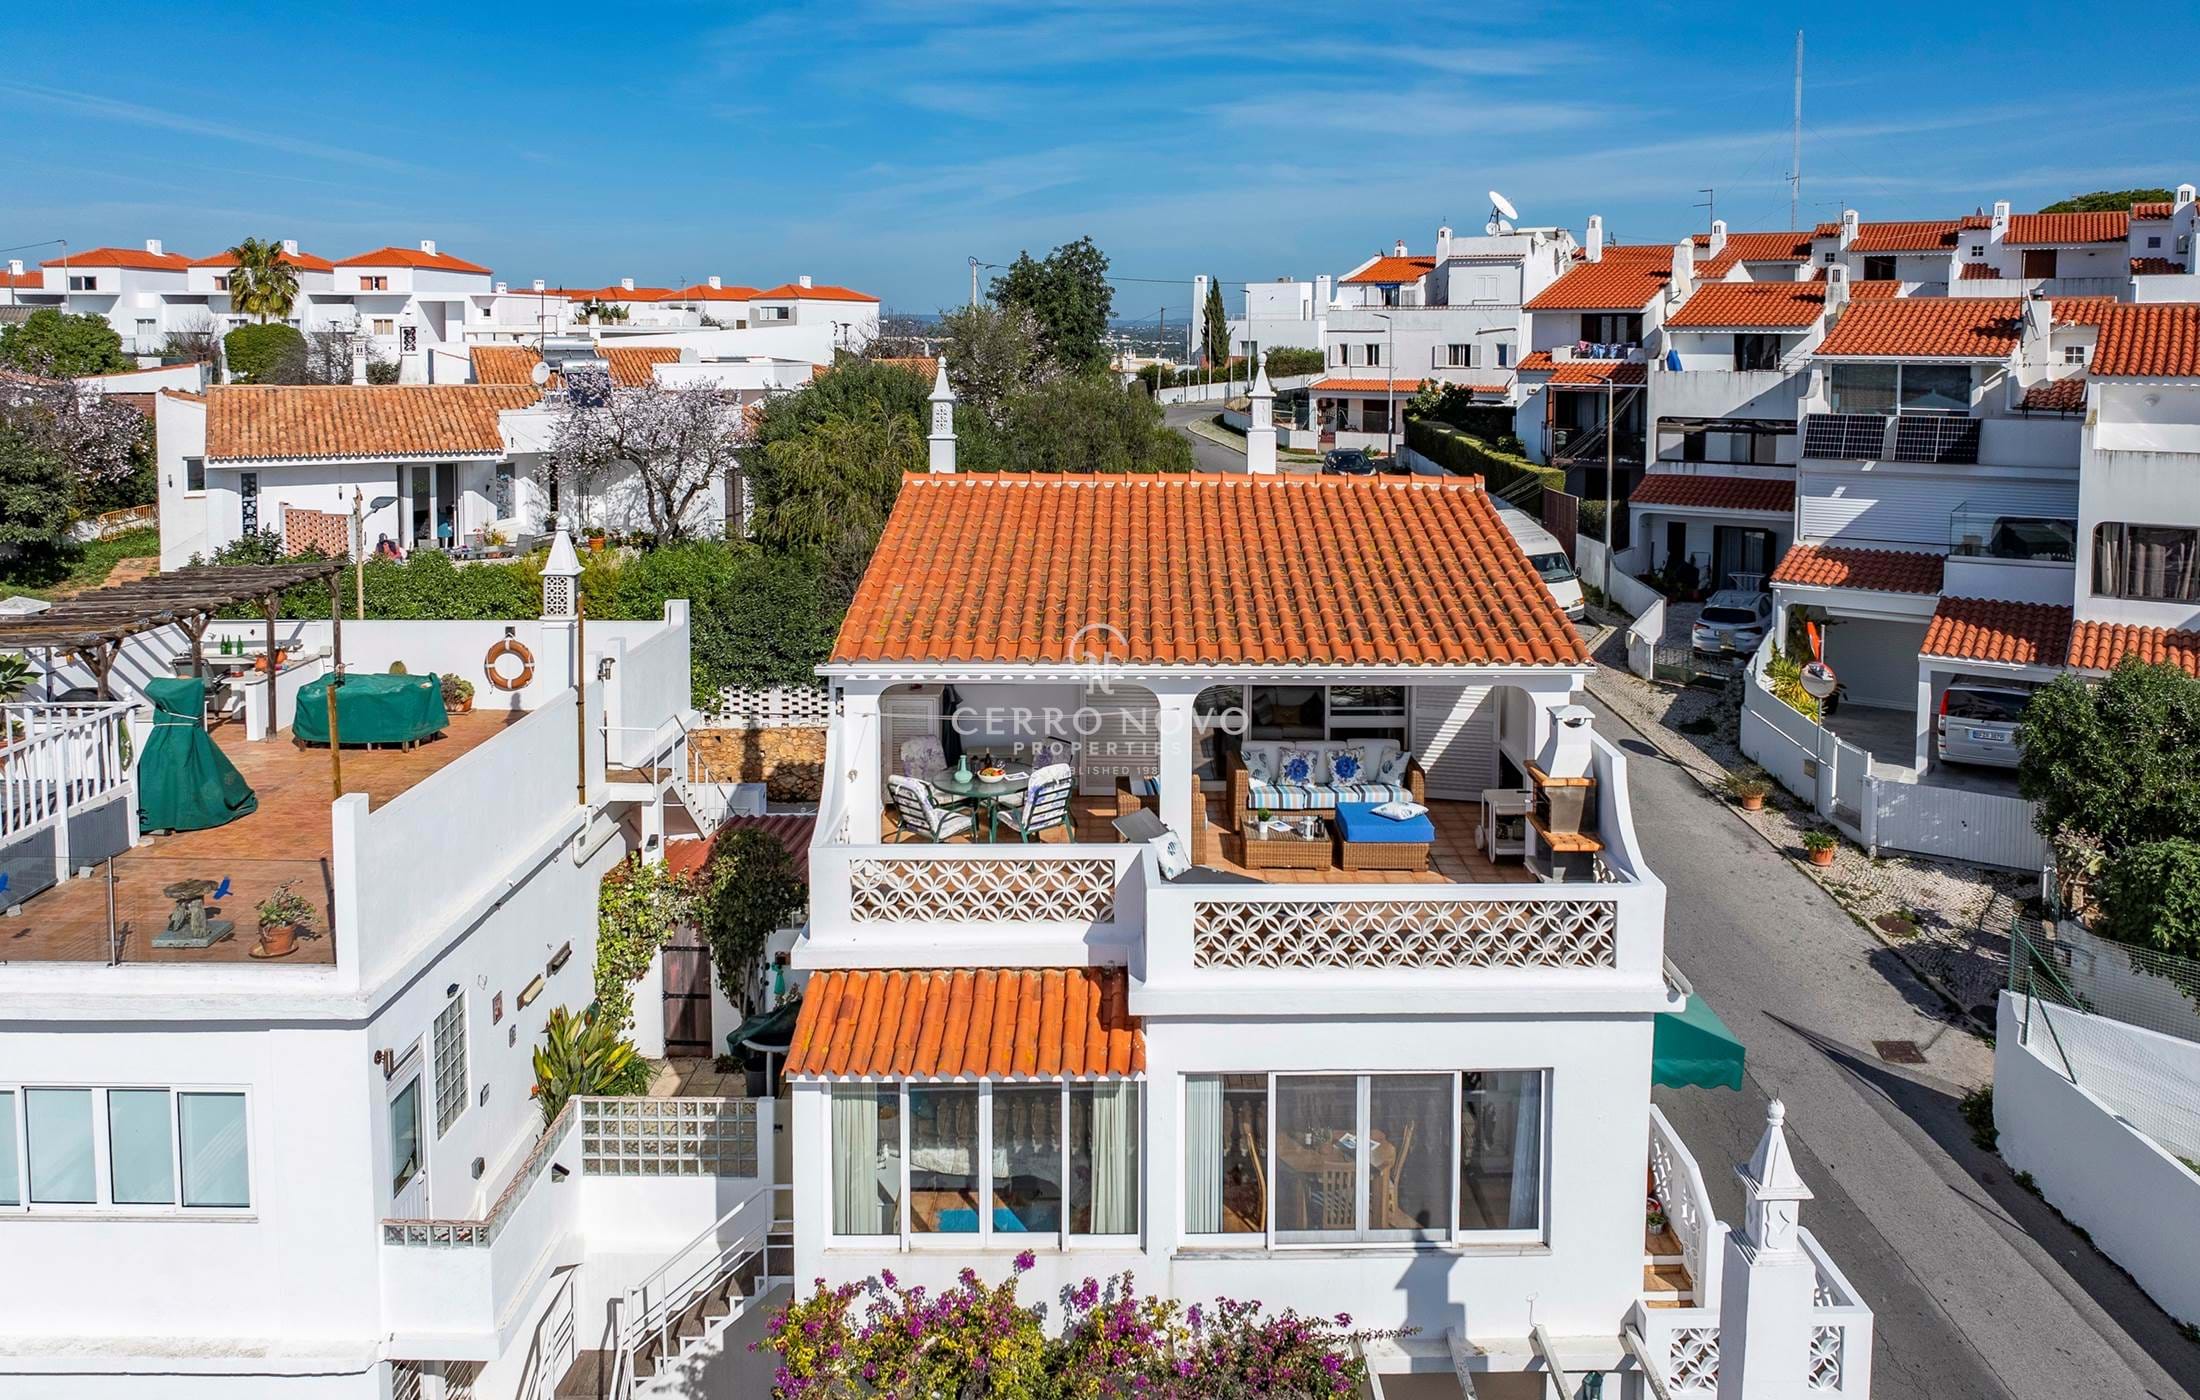 Charming villa with lovely sea views located close to all amenities